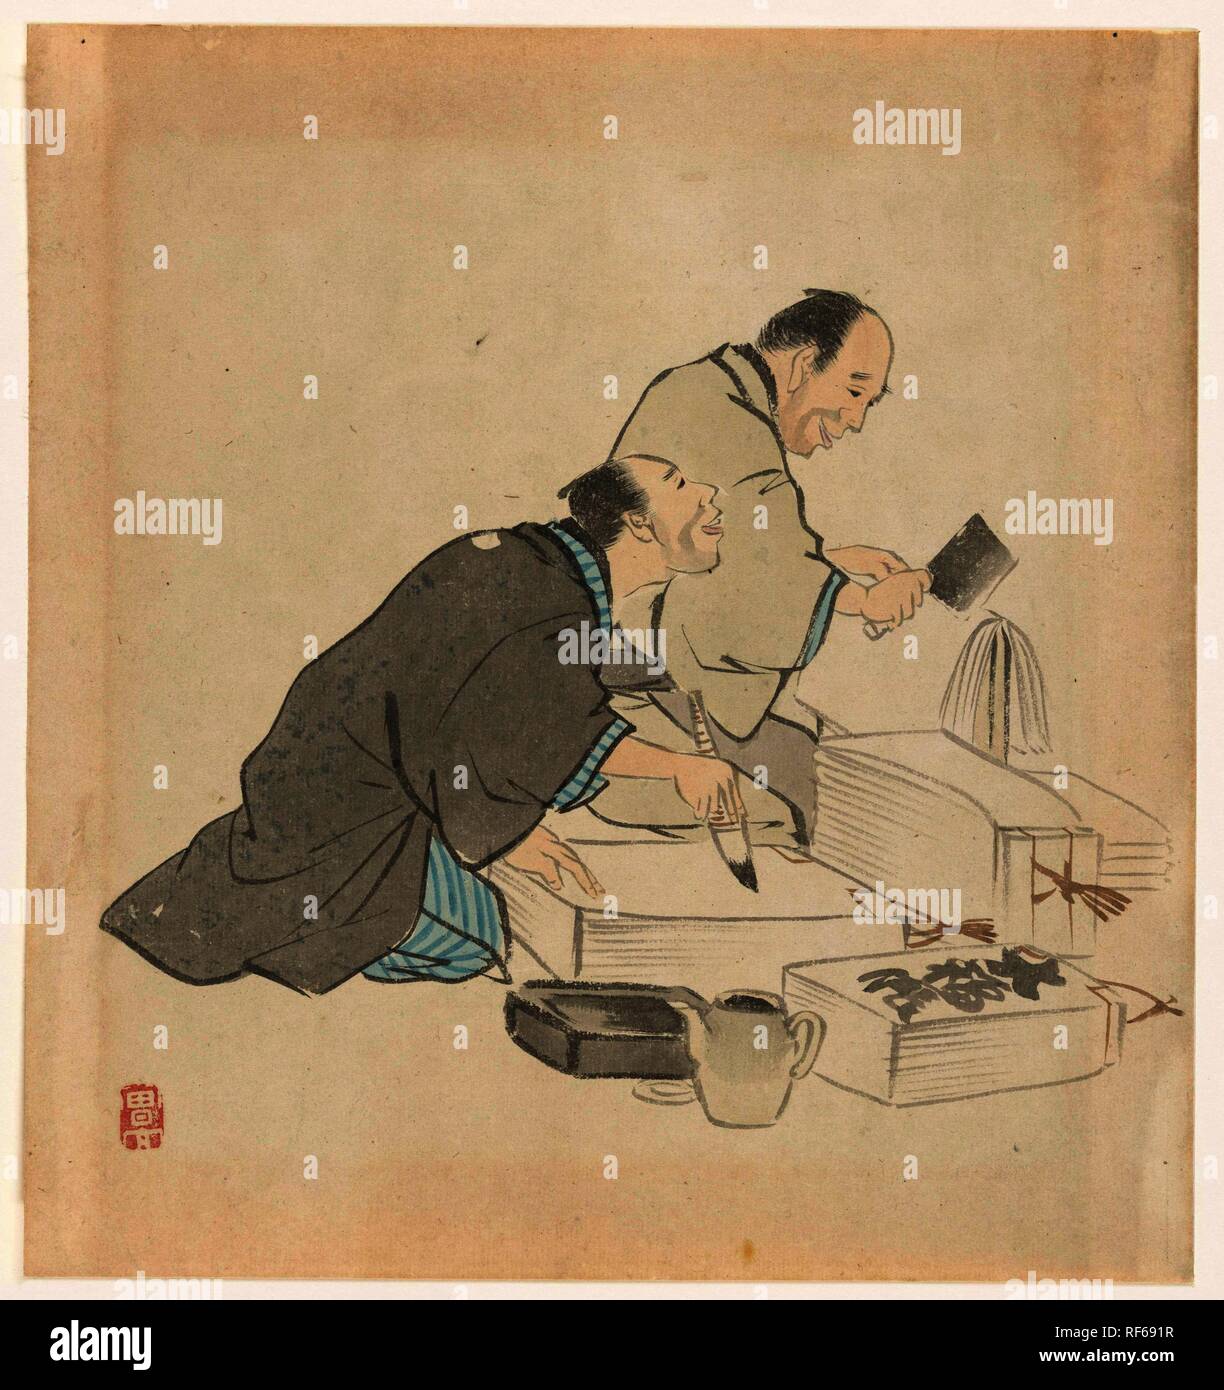 Japanese calligrapher and a Japanese bookbinder. Draughtsman: anonymous. Dating: c. 1900. Measurements: h 235 mm × w 220 mm. Museum: Rijksmuseum, Amsterdam. Stock Photo